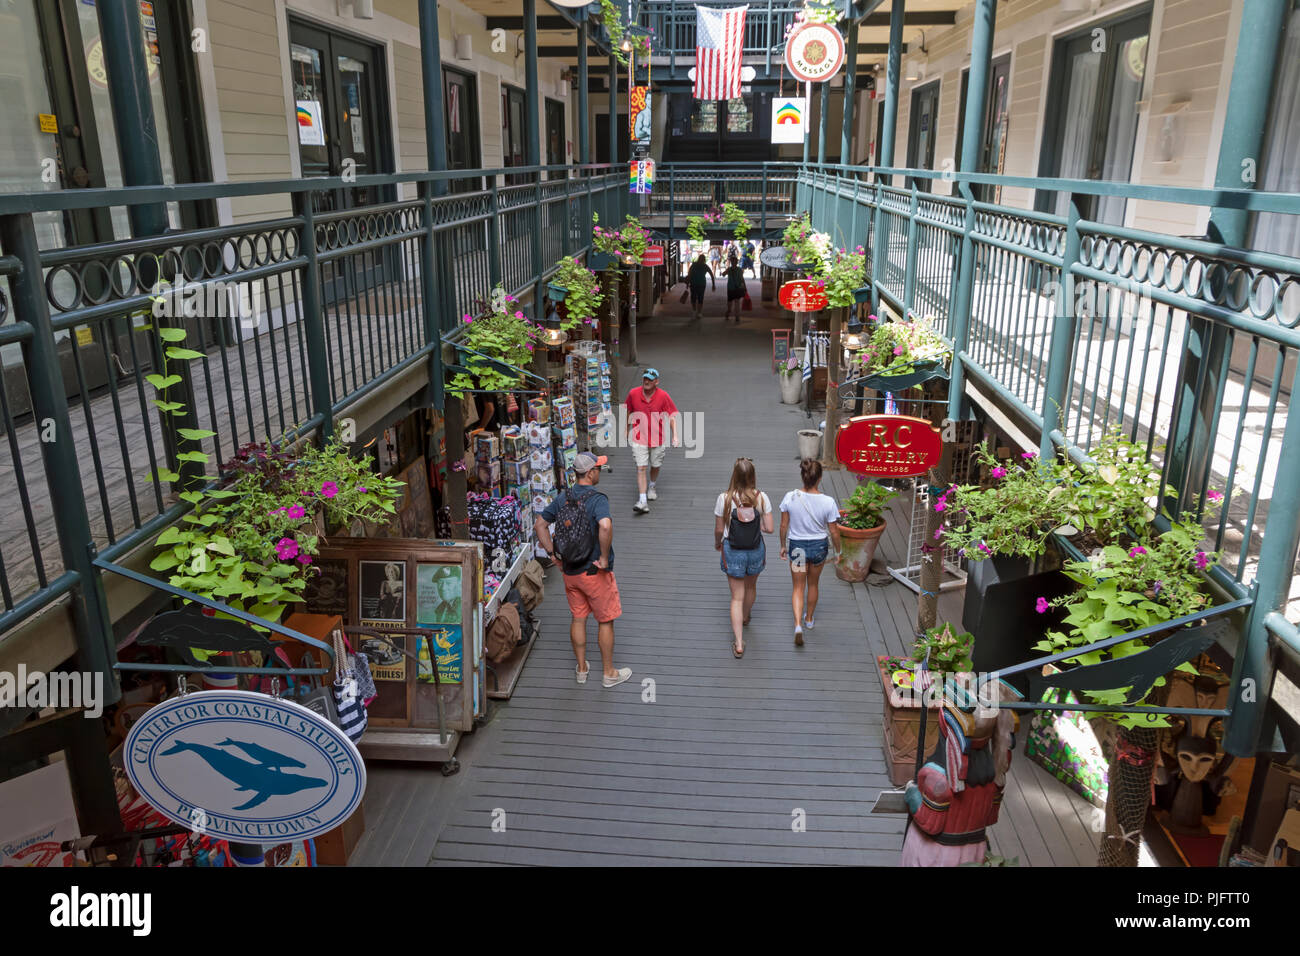 Tourists in Whaler's Wharf shopping mall, Provincetown, Cape Cod, Massachusetts. Stock Photo